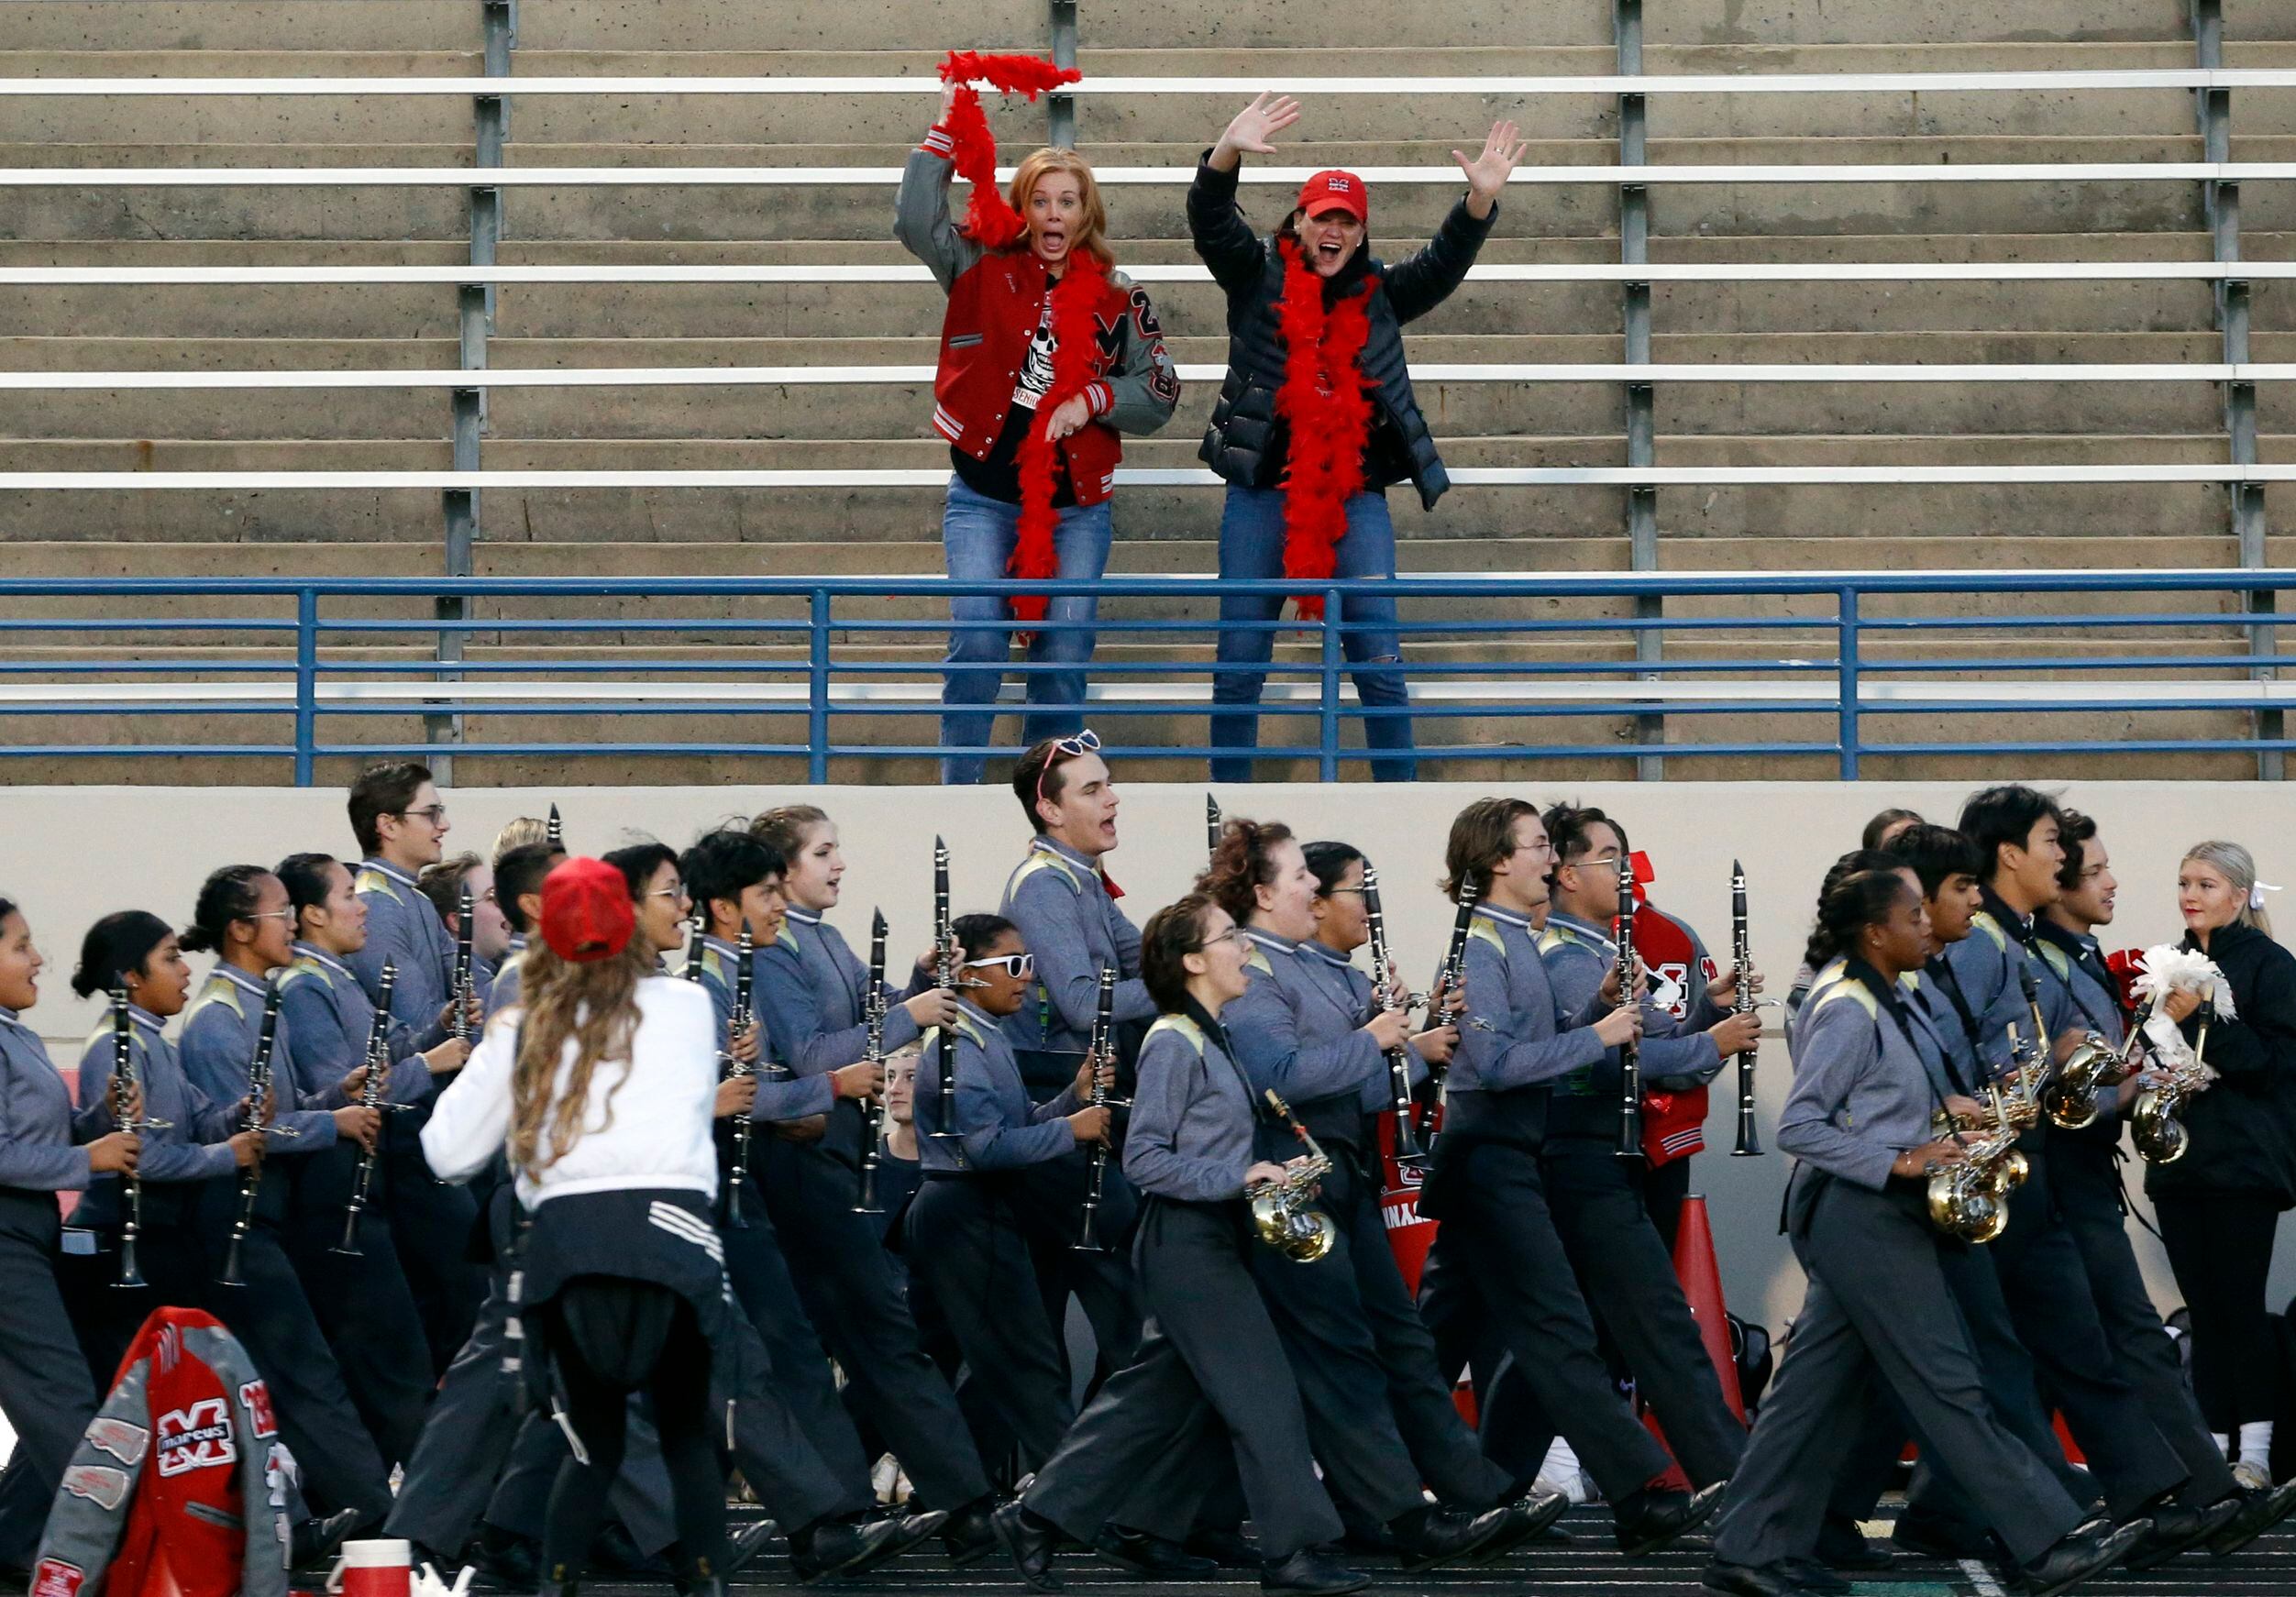 Two Flower Mound Marcus fans wave from the stands, as the Plano East high band marches in...